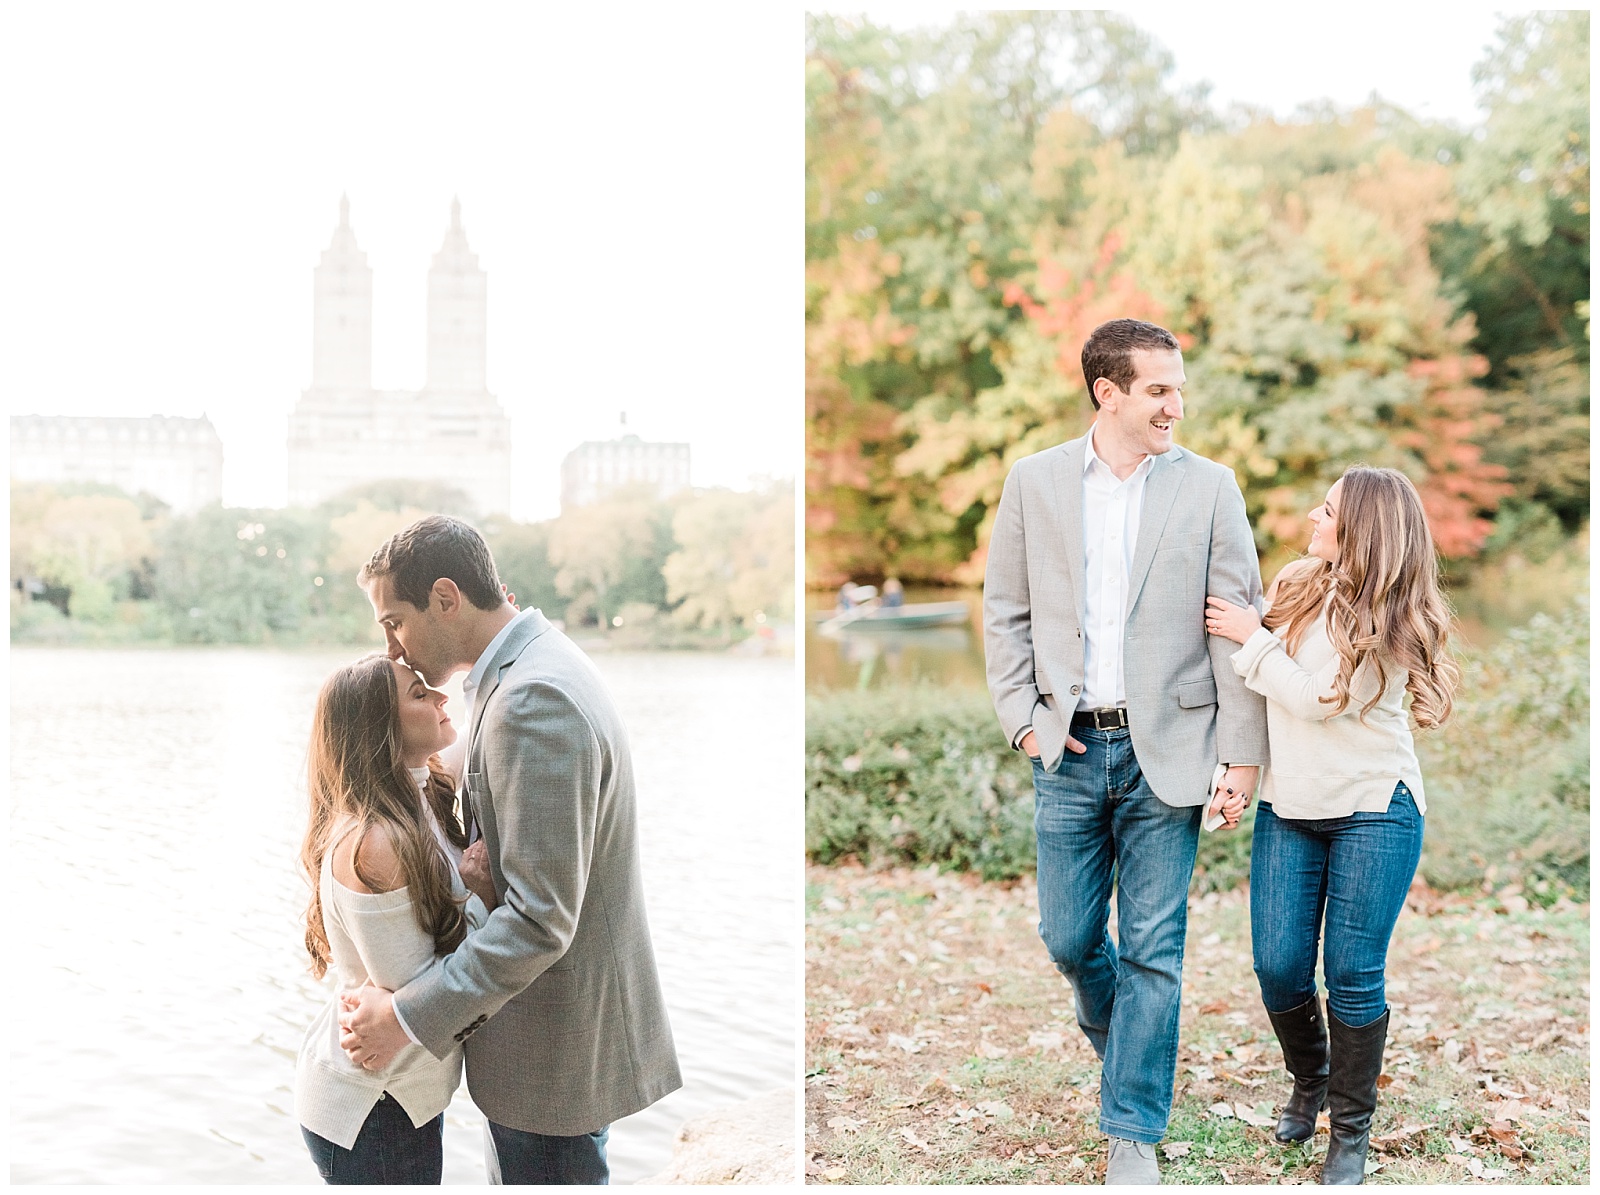 Central Park,City,Engagement Session,Fall,NYC,Nature,New York,San Remo,Skyline,Wedding Photographer,